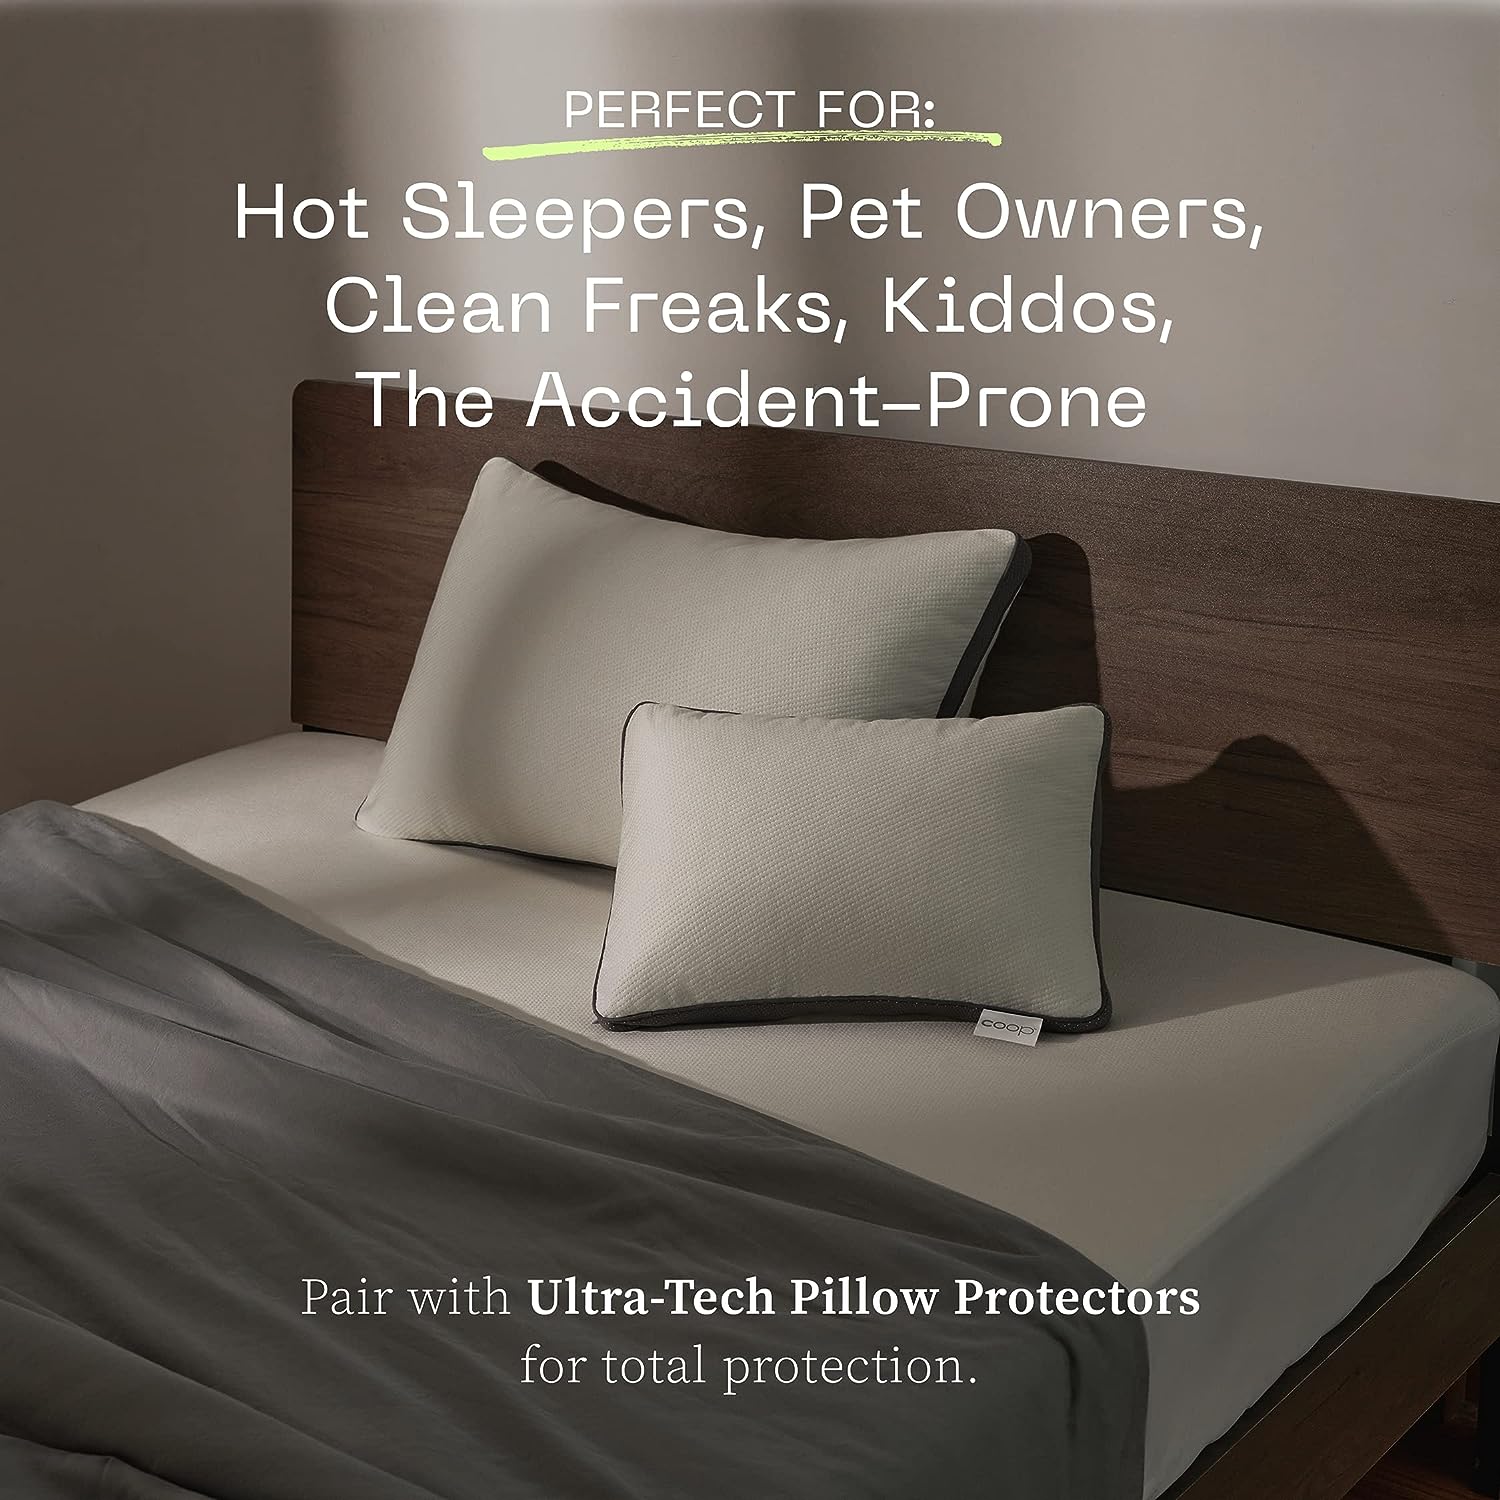  SureGuard Full Size Mattress Protector - 100% Waterproof,  Hypoallergenic - Premium Fitted Cotton Terry Cover White : Home & Kitchen